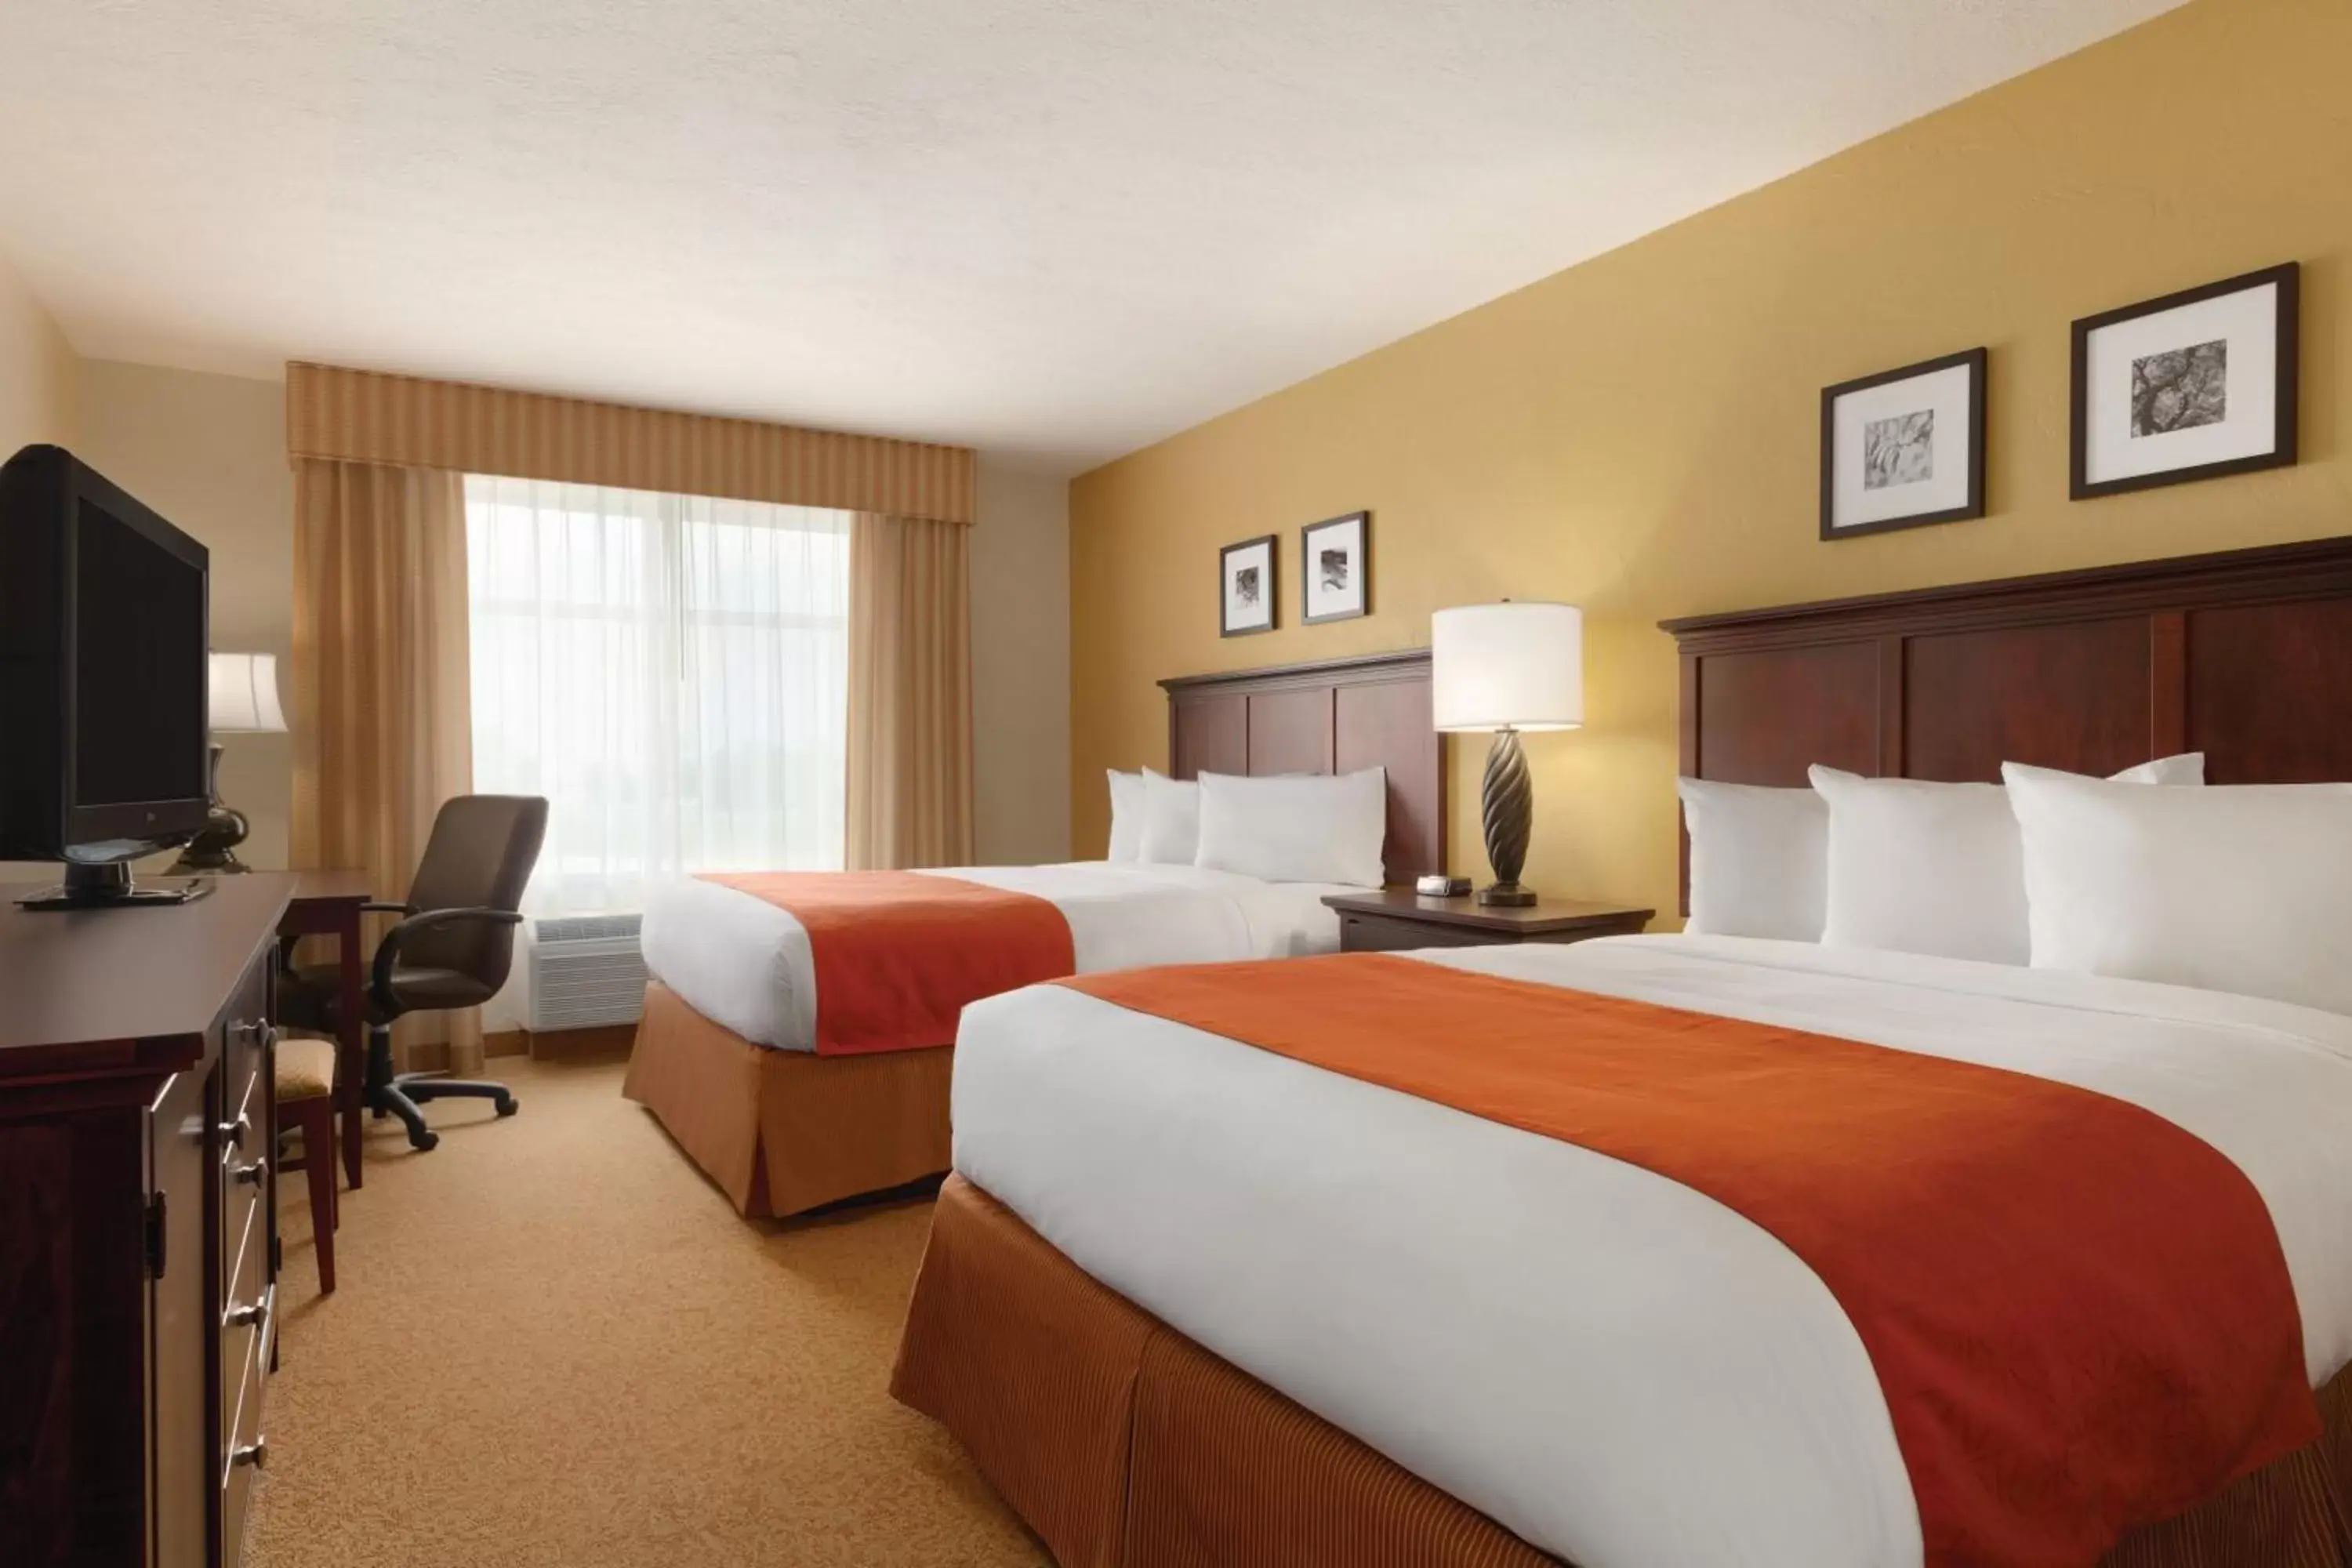 Day in Country Inn & Suites by Radisson, Lawrenceville, GA